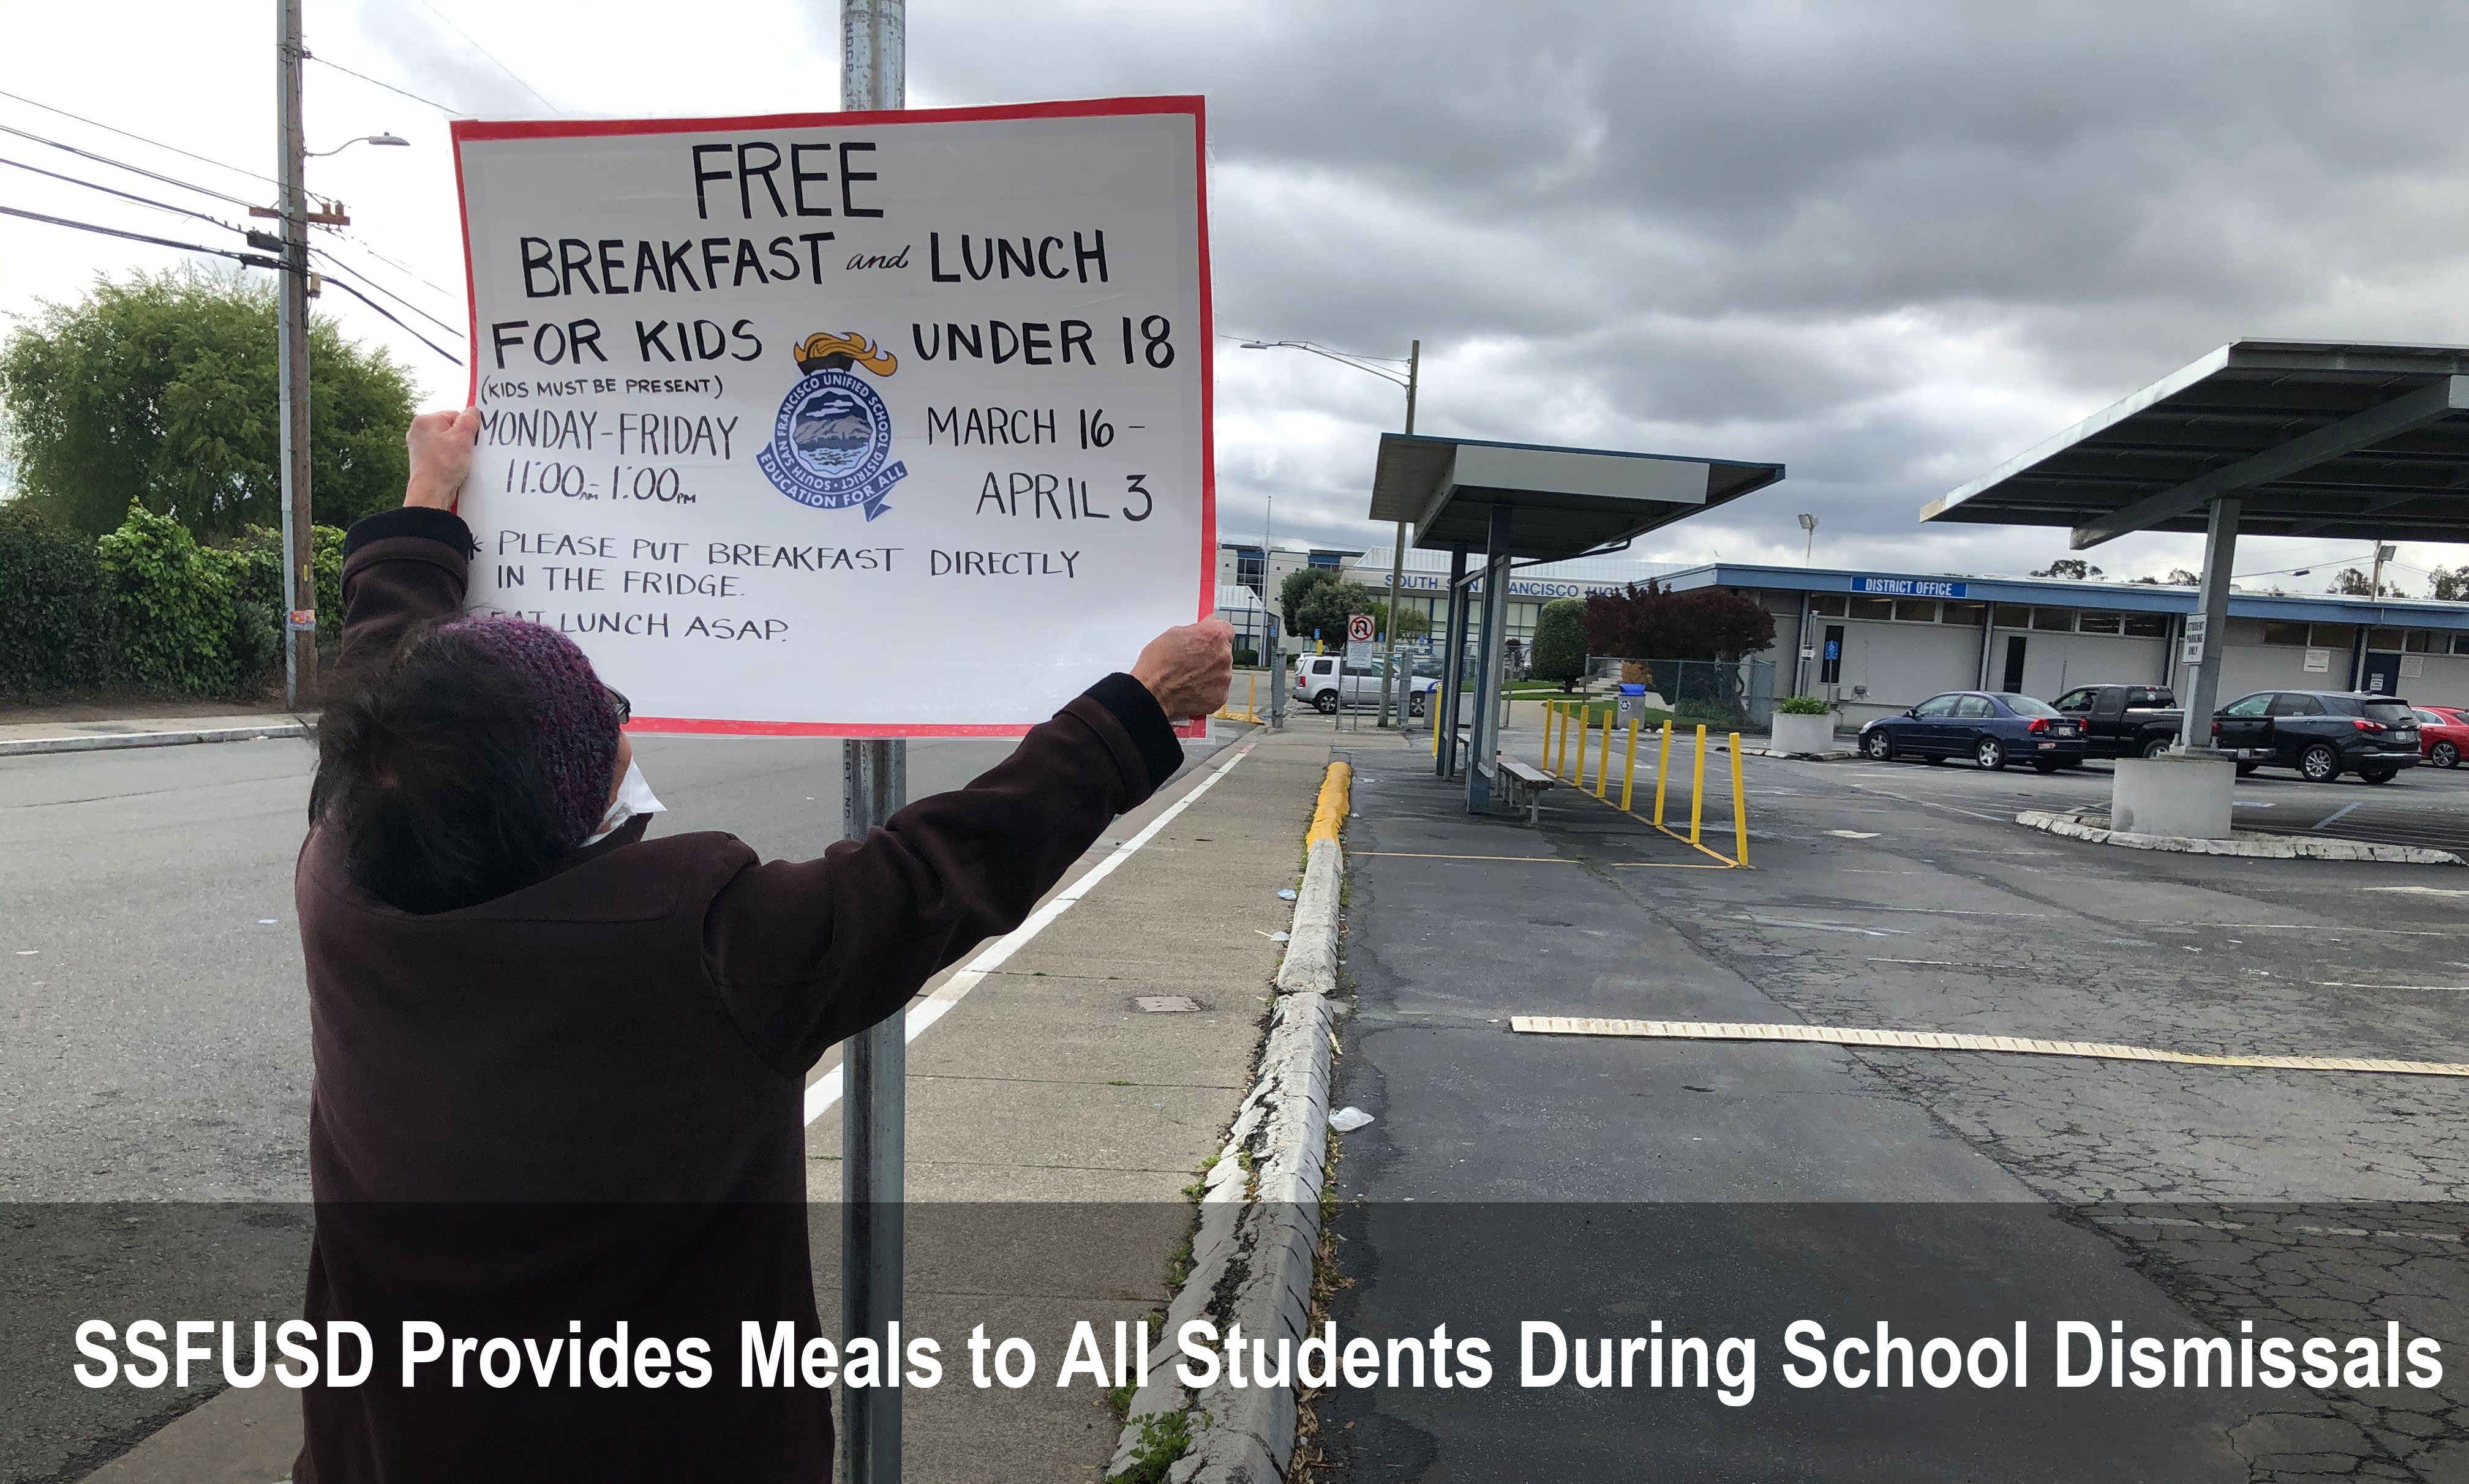 SSFUSD Provides Meals to All Students from March 16 to April 3